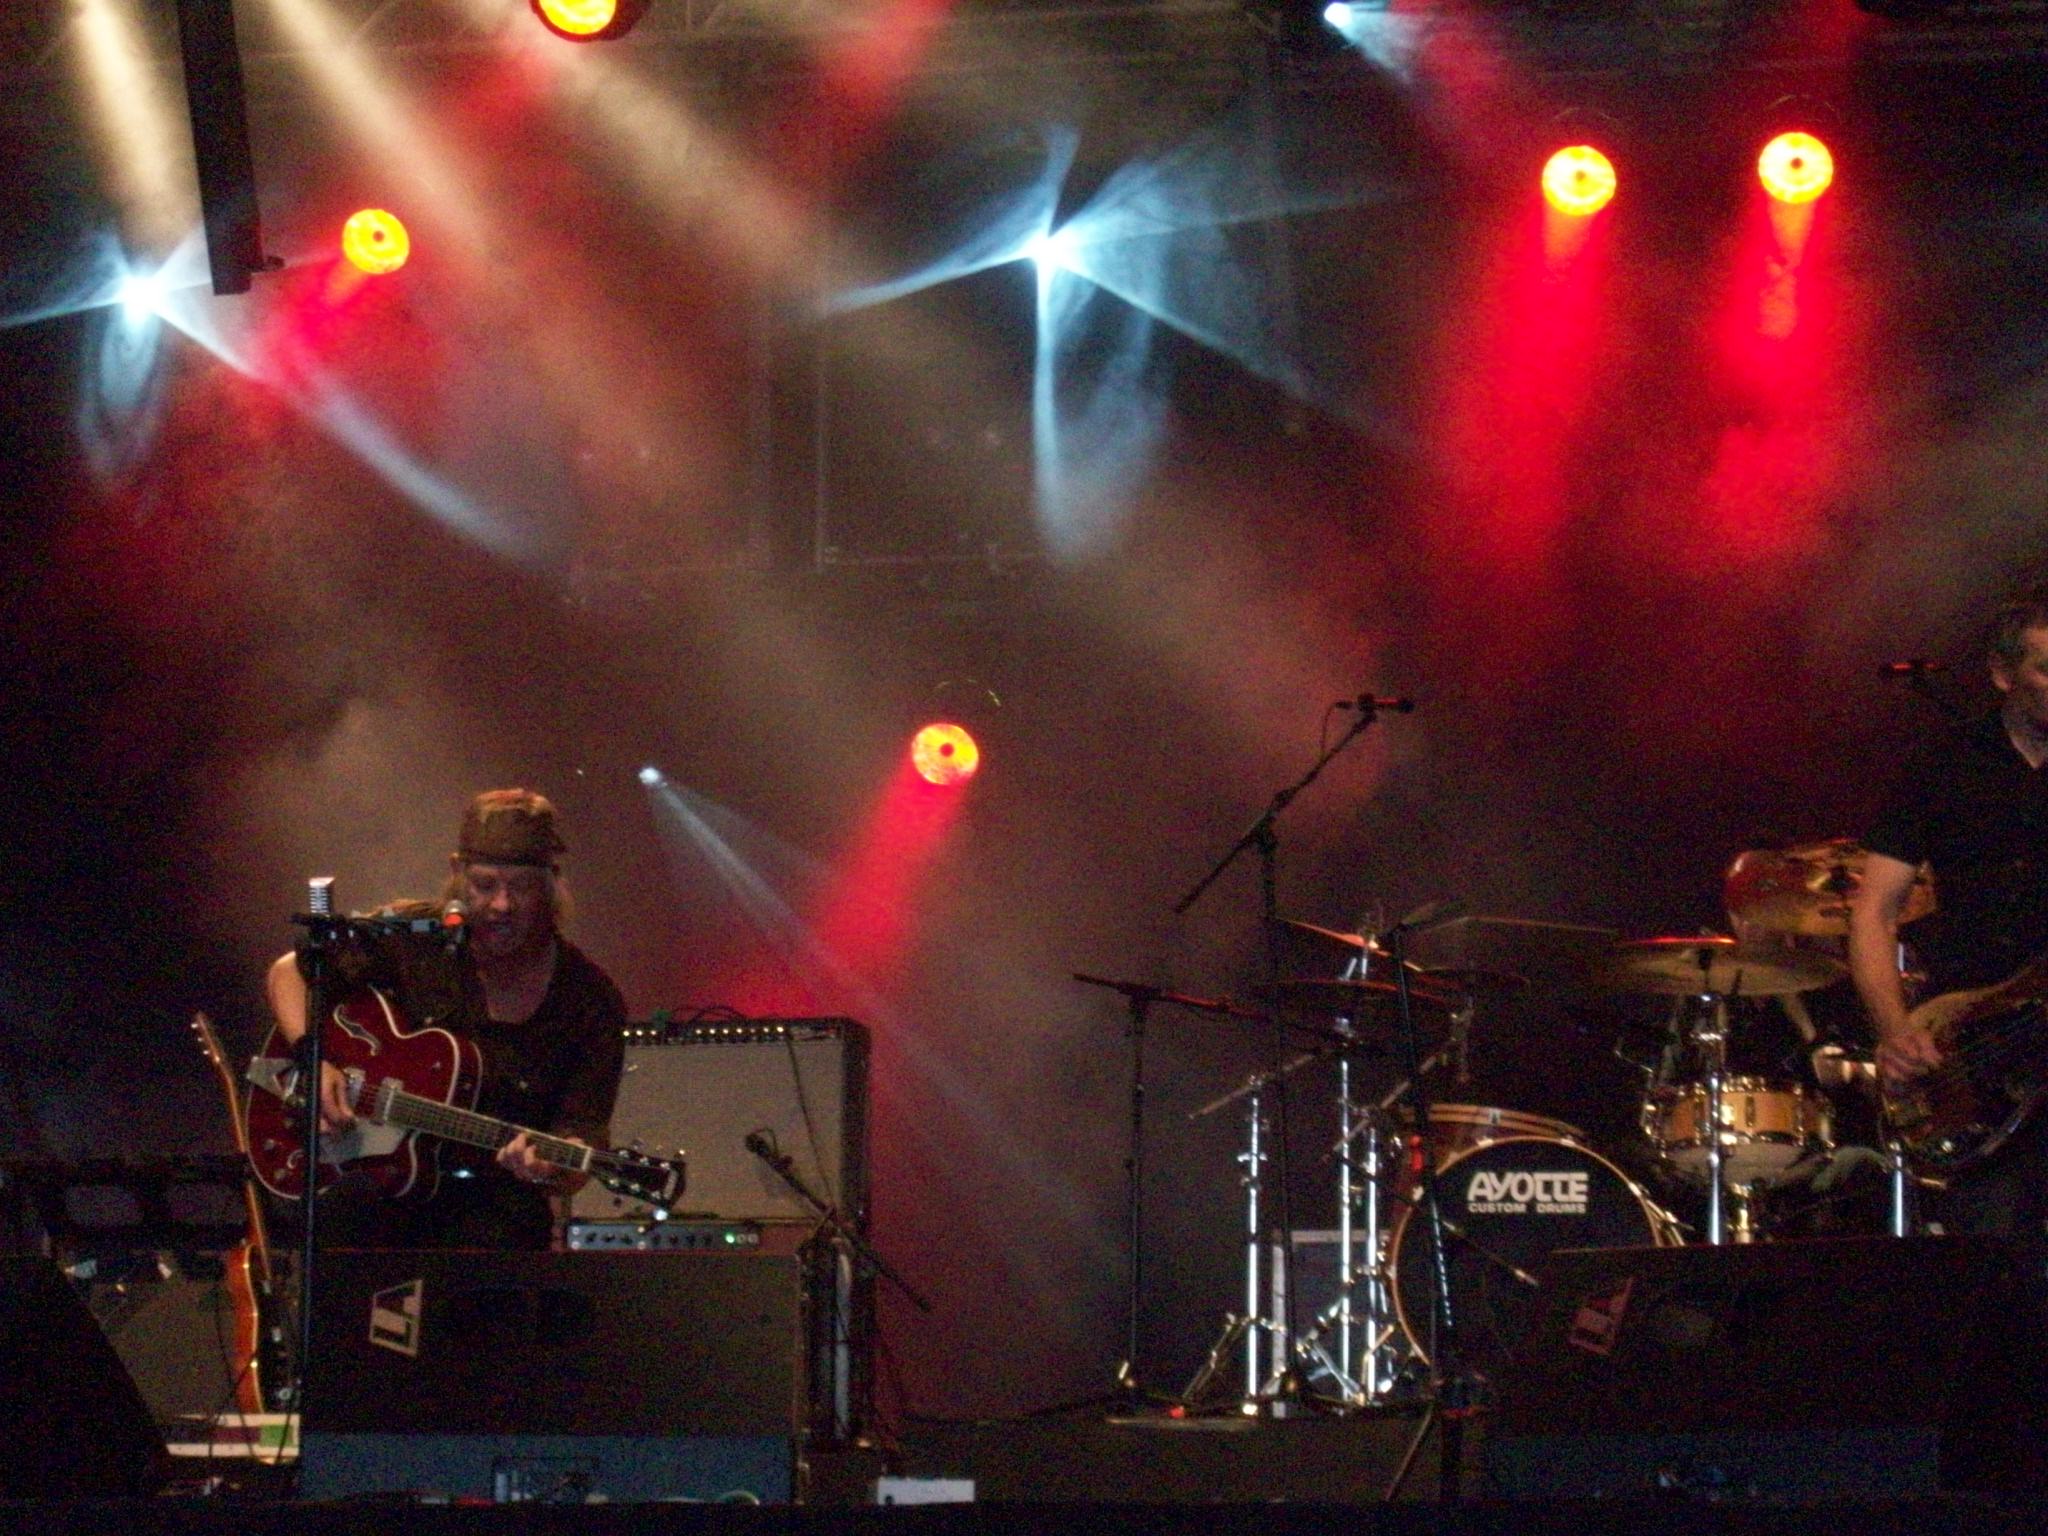 a band on stage playing music with red and blue lights